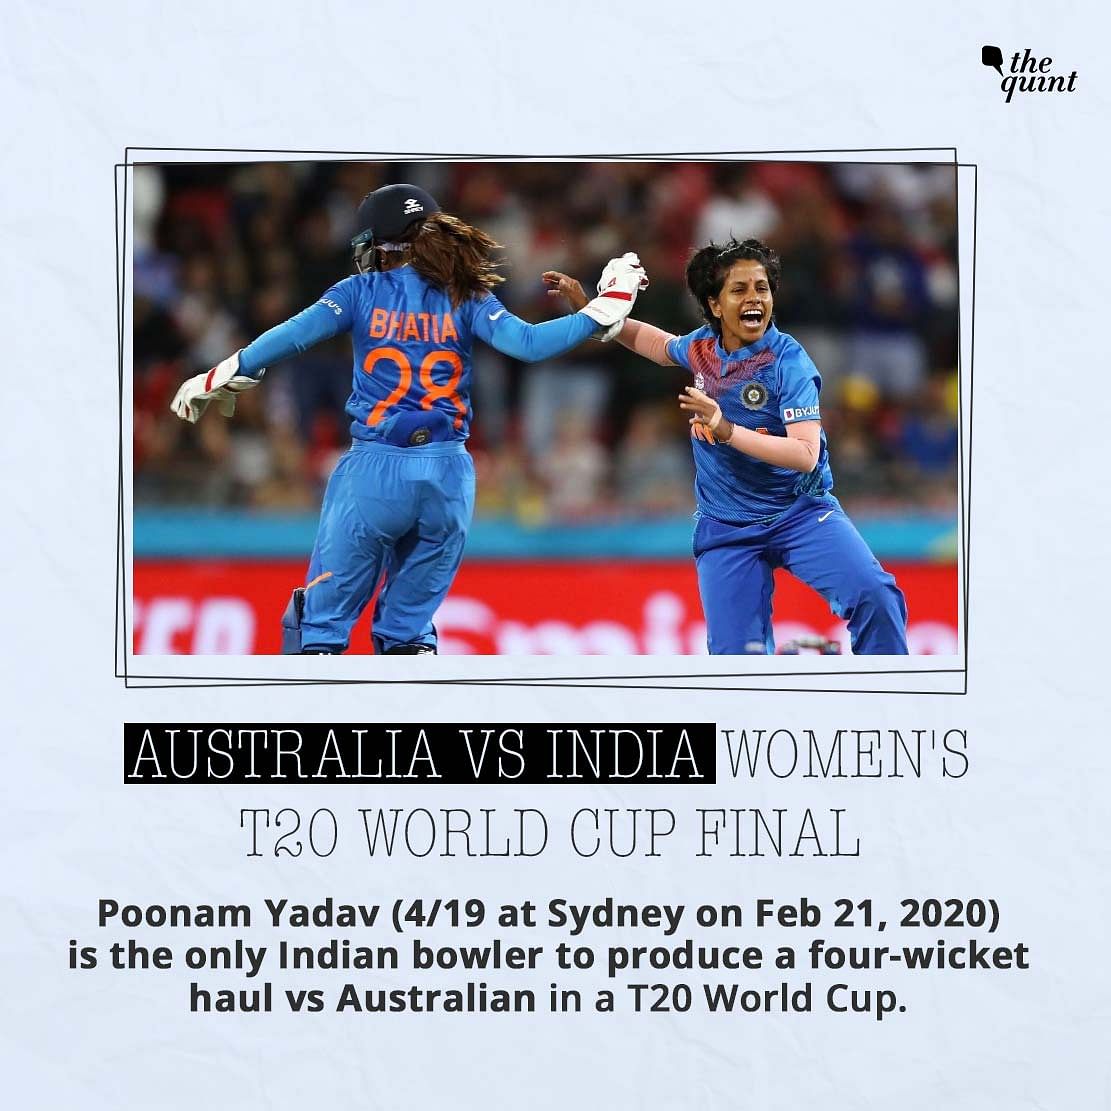 India and Australia are into the Women’s Twenty20 Cricket World Cup final. Big stats previewing the match.